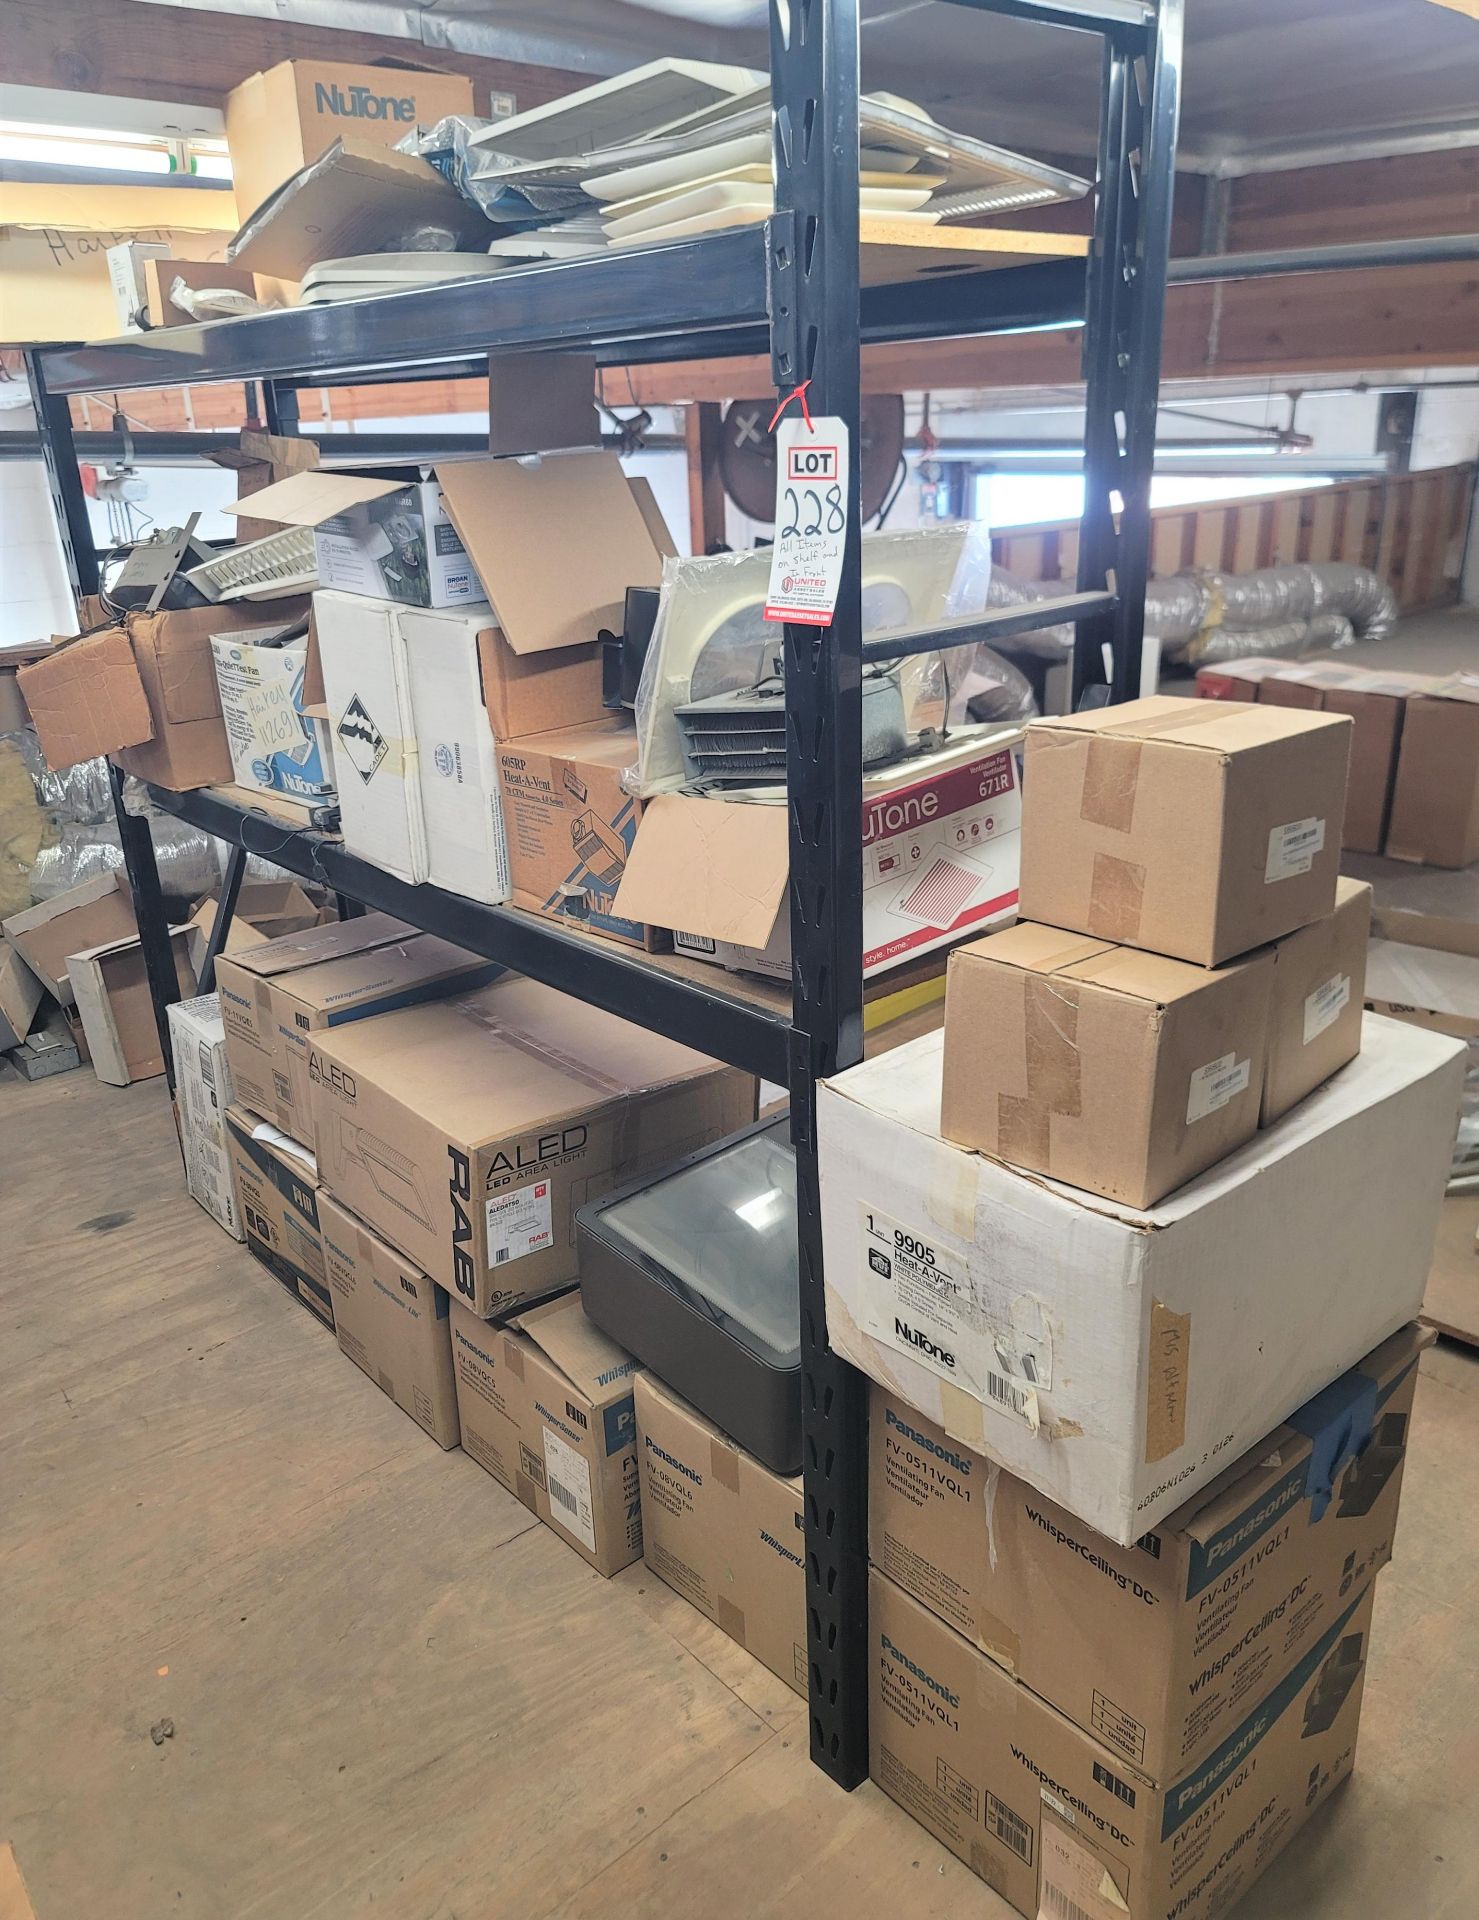 LOT - ALL ITEMS ON SHELF UNIT AND IN FRONT OF IT, TO INCLUDE: COMMERCIAL LIGHT FIXTURES, CEILING